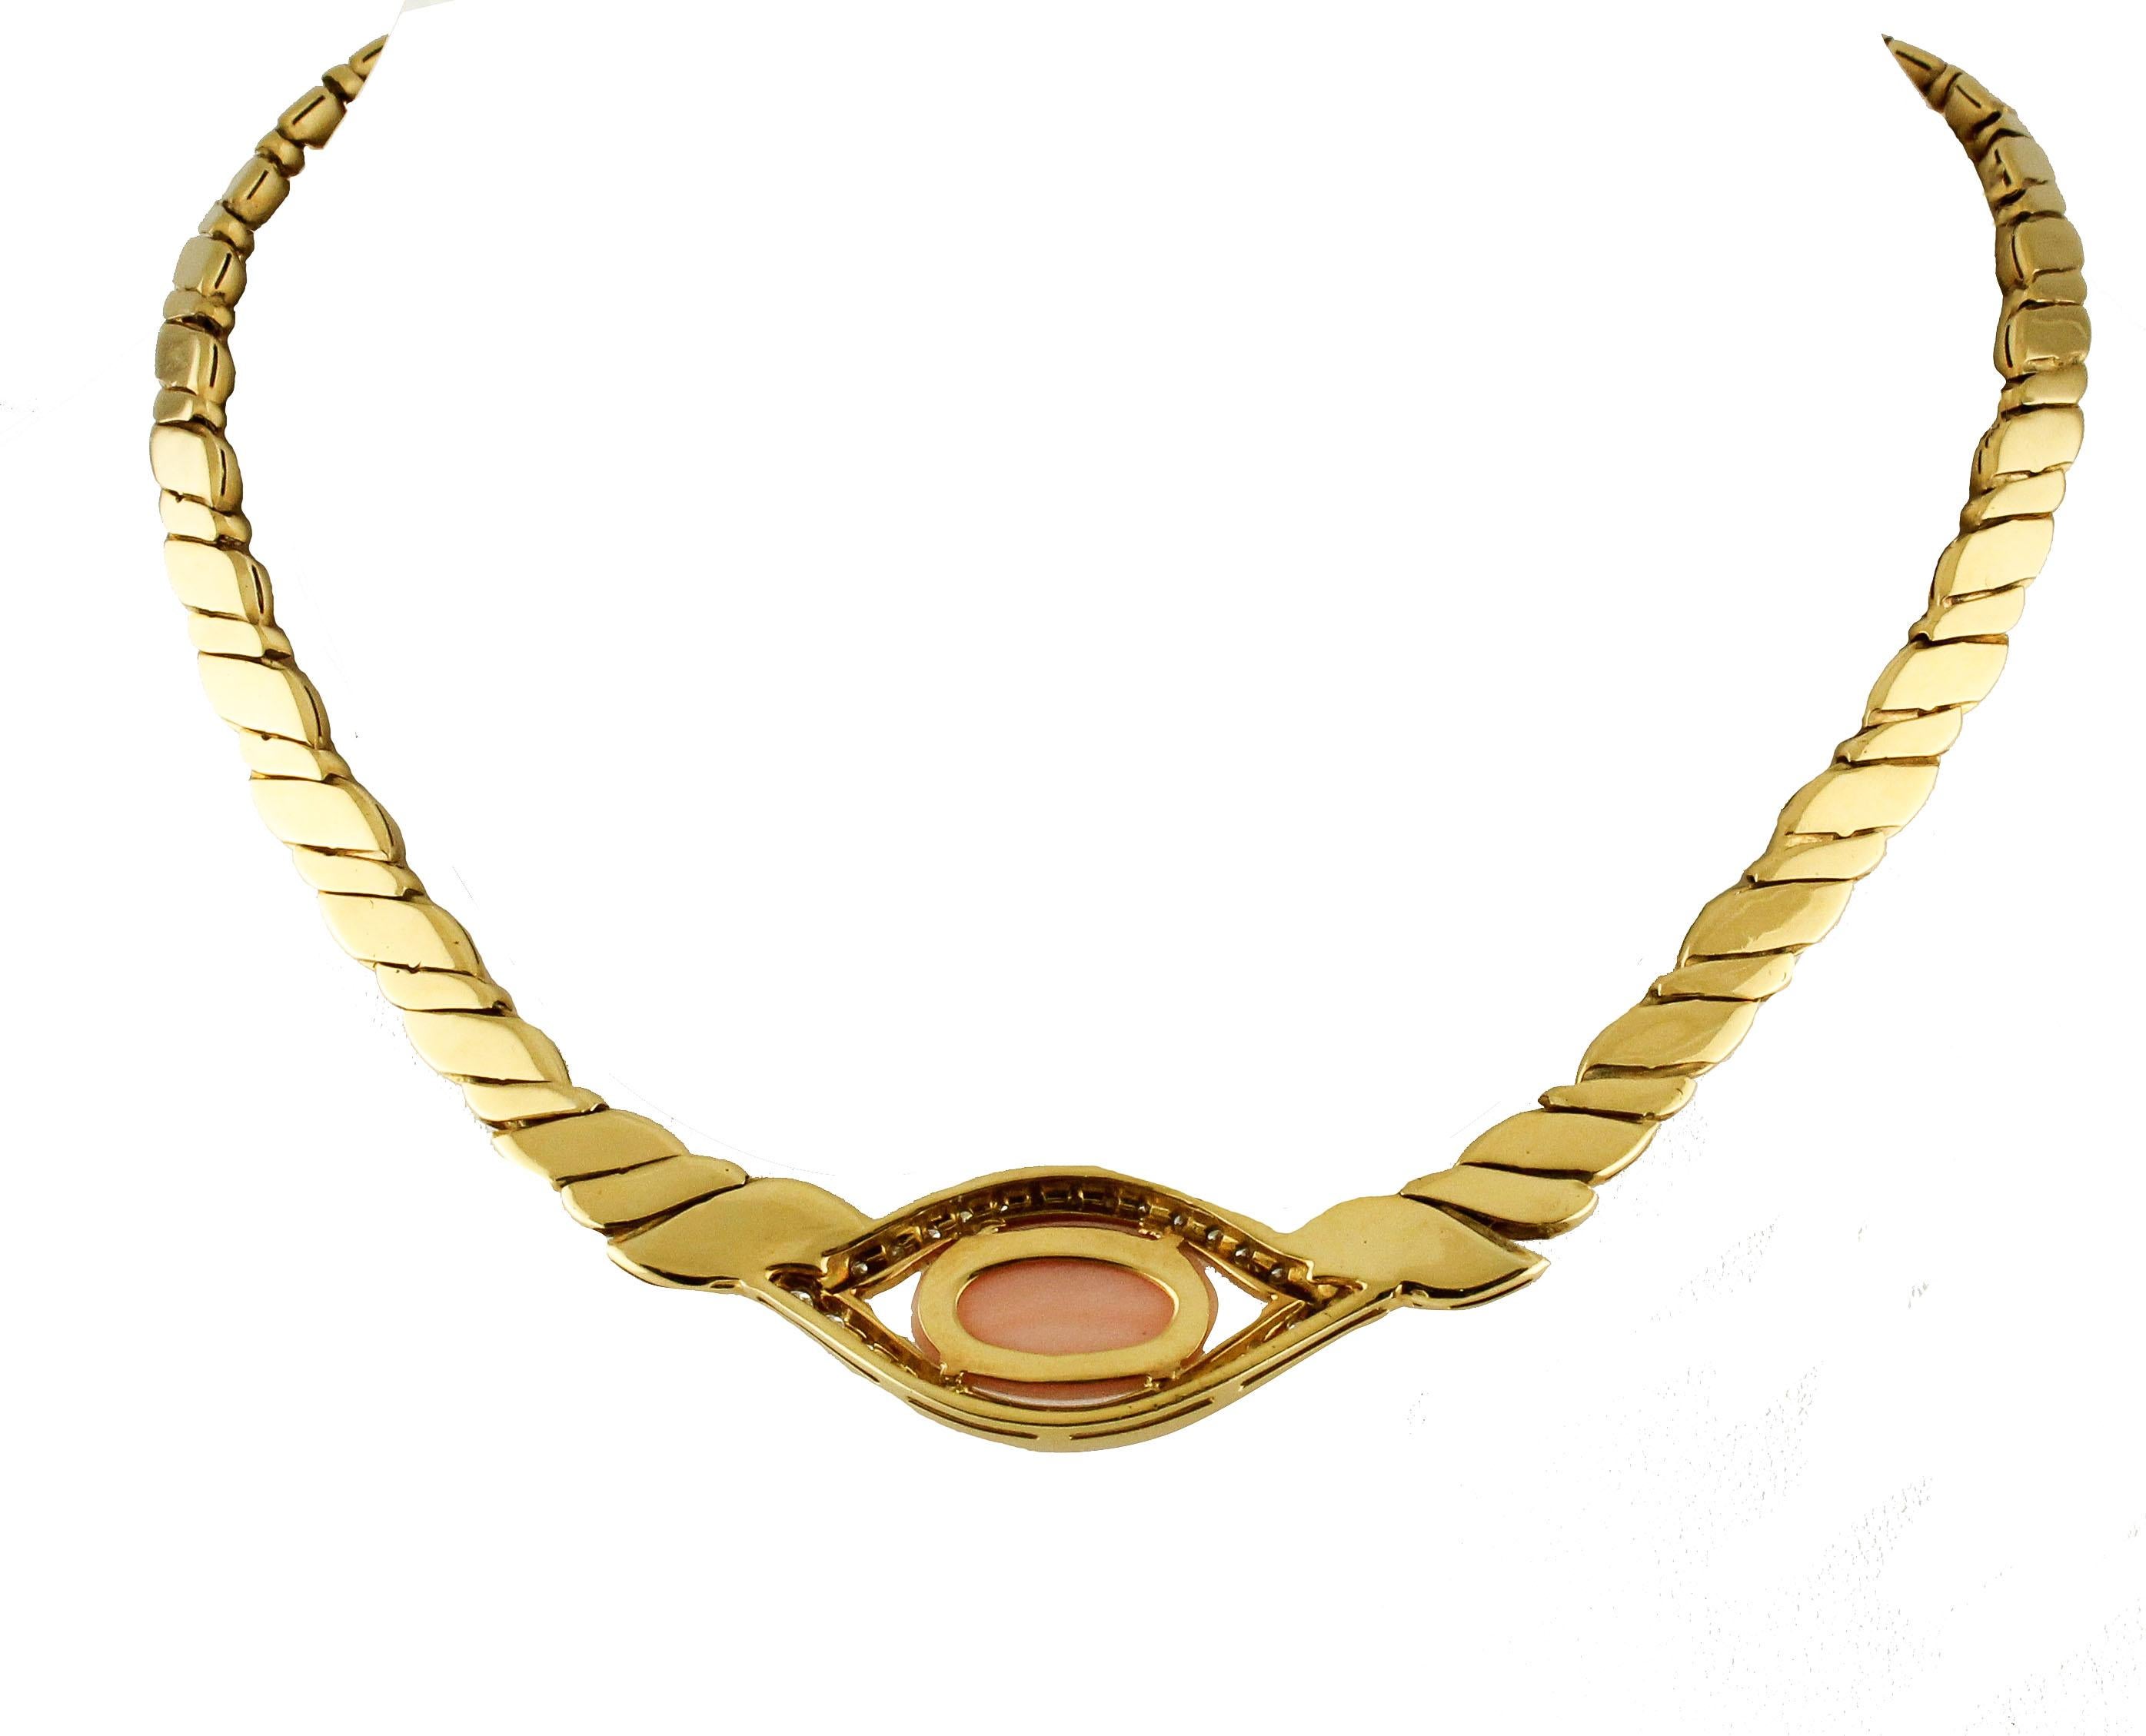 SHIPPING POLICY:
No additional costs will be added to this order.
Shipping costs will be totally covered by the seller (customs duties included). 
 
Very elegant and sophisticate chain necklace in 18K yellow gold with a central pink coral button